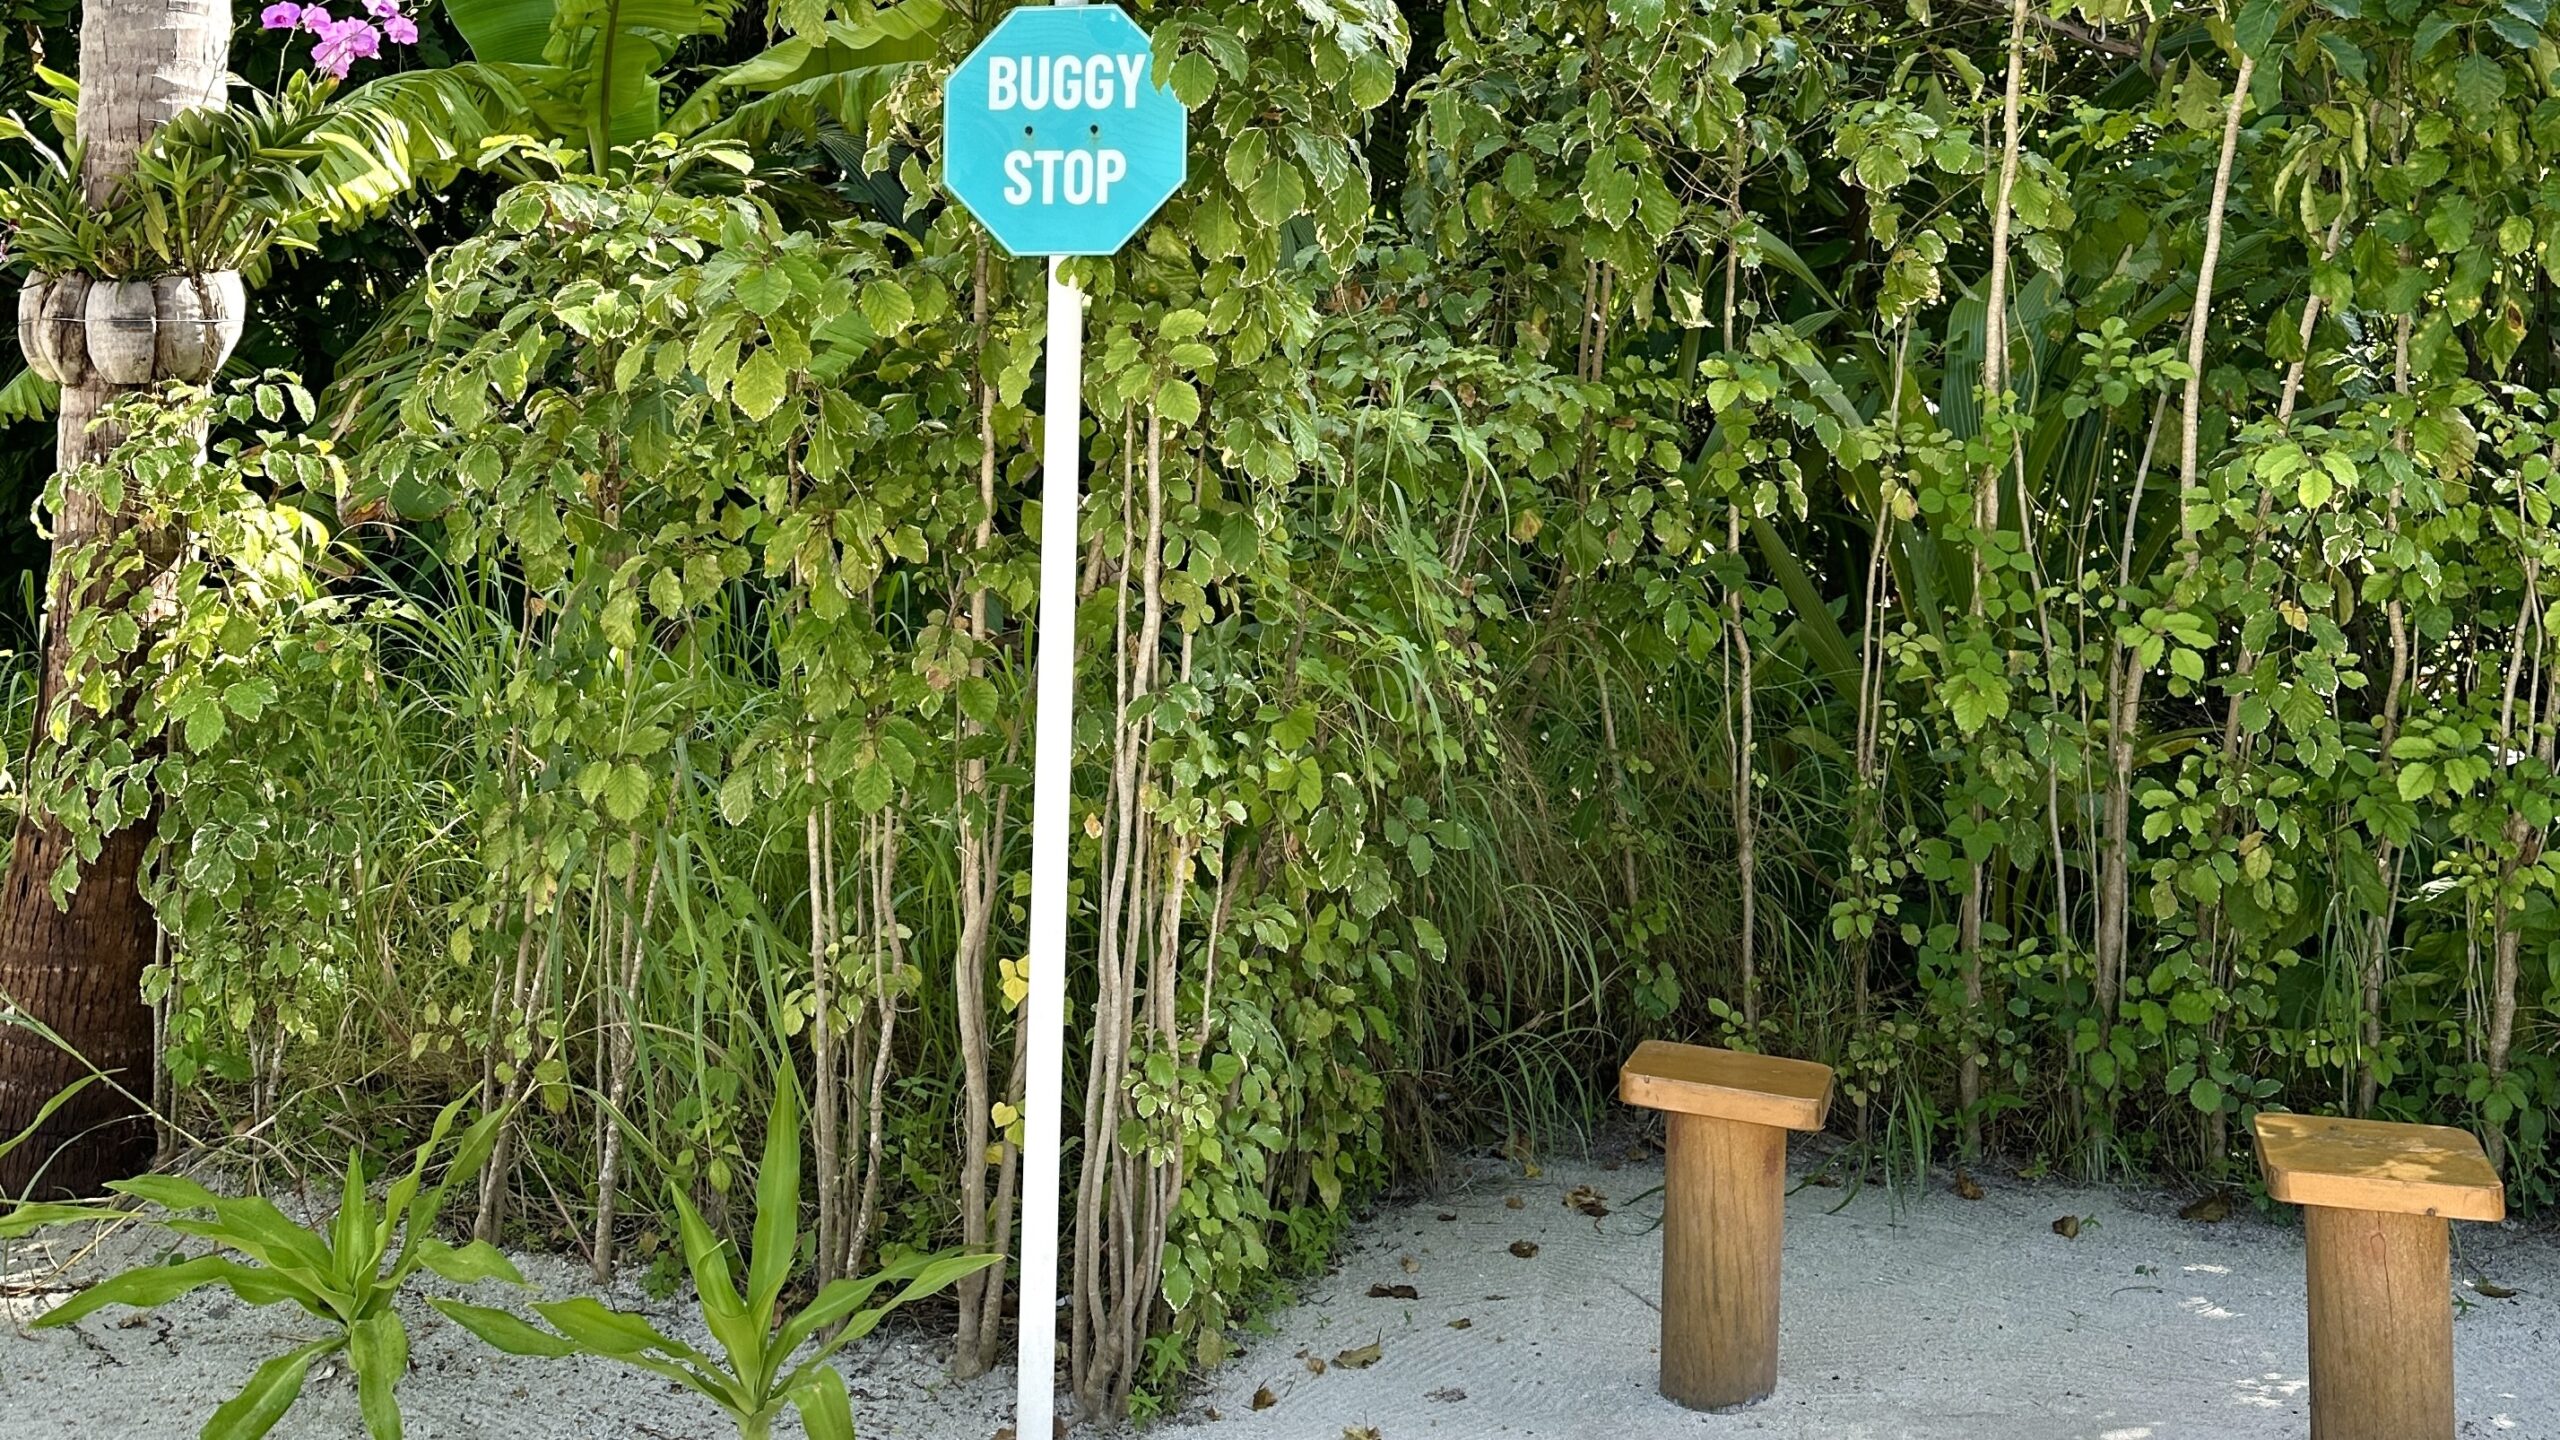 Buggy Stop